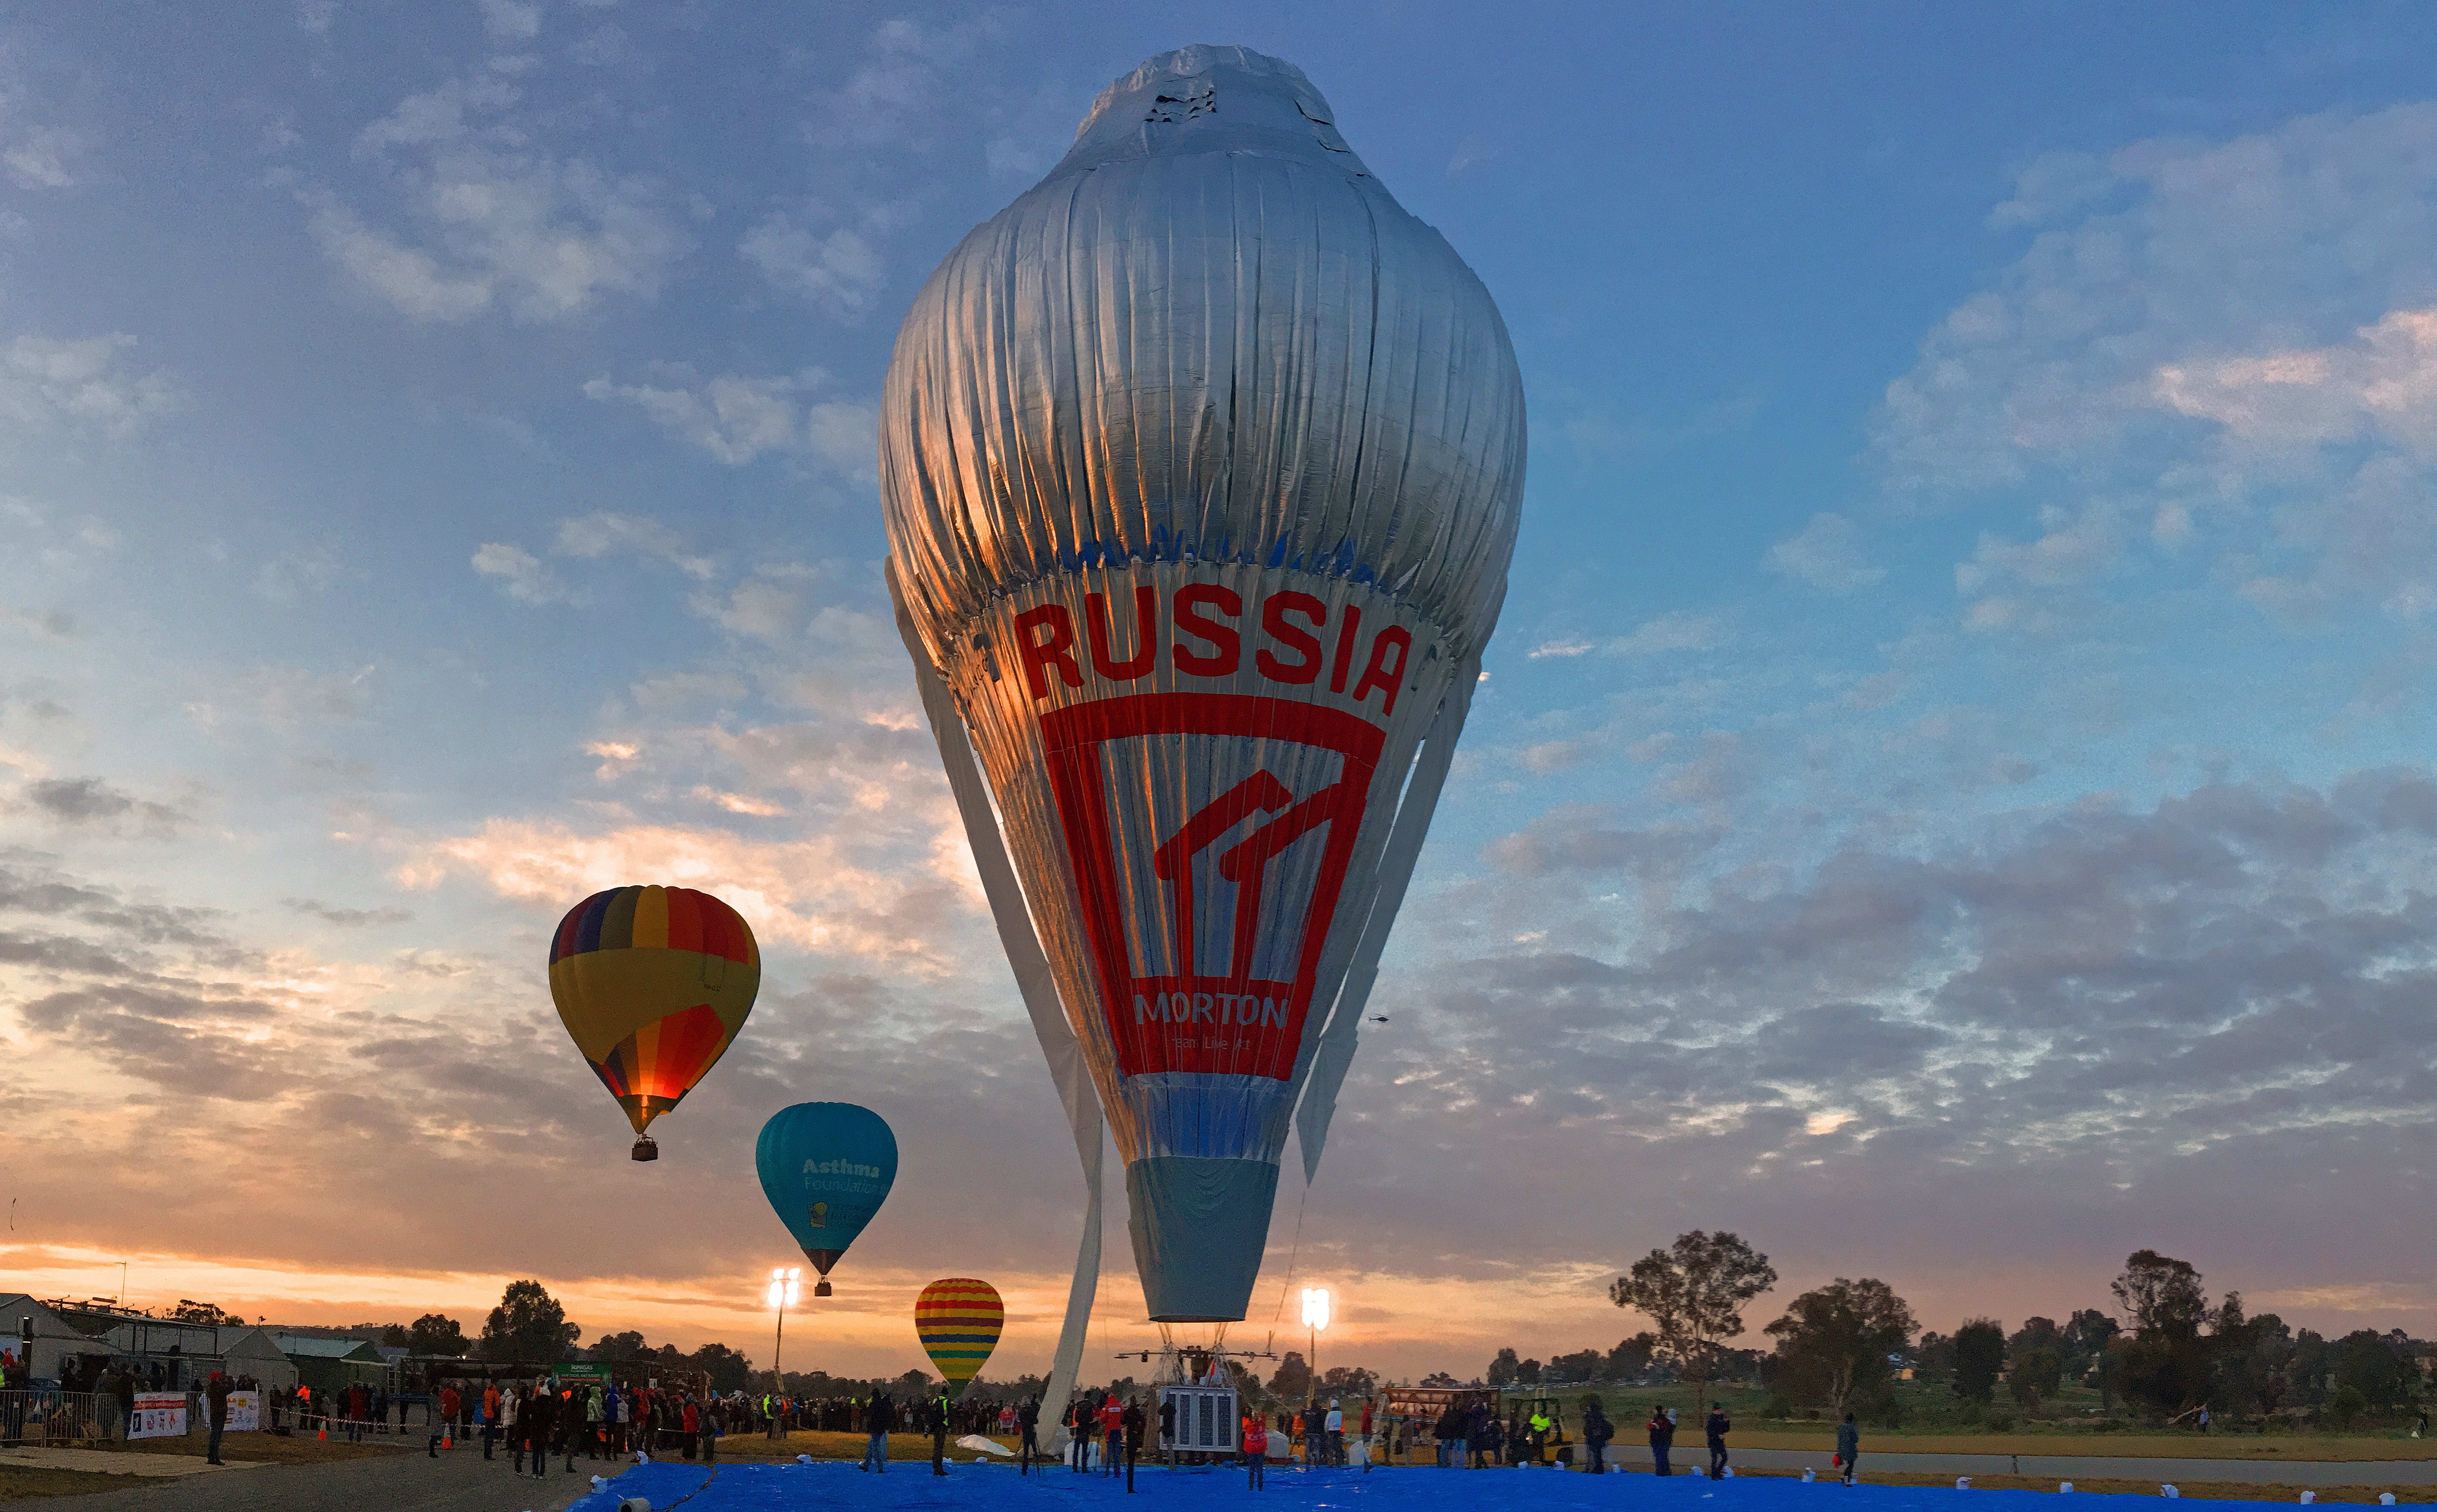 The hot air balloon Morton is seen in this photo about to take to the skies for a round-the-world trip from Northam in Western Australia.